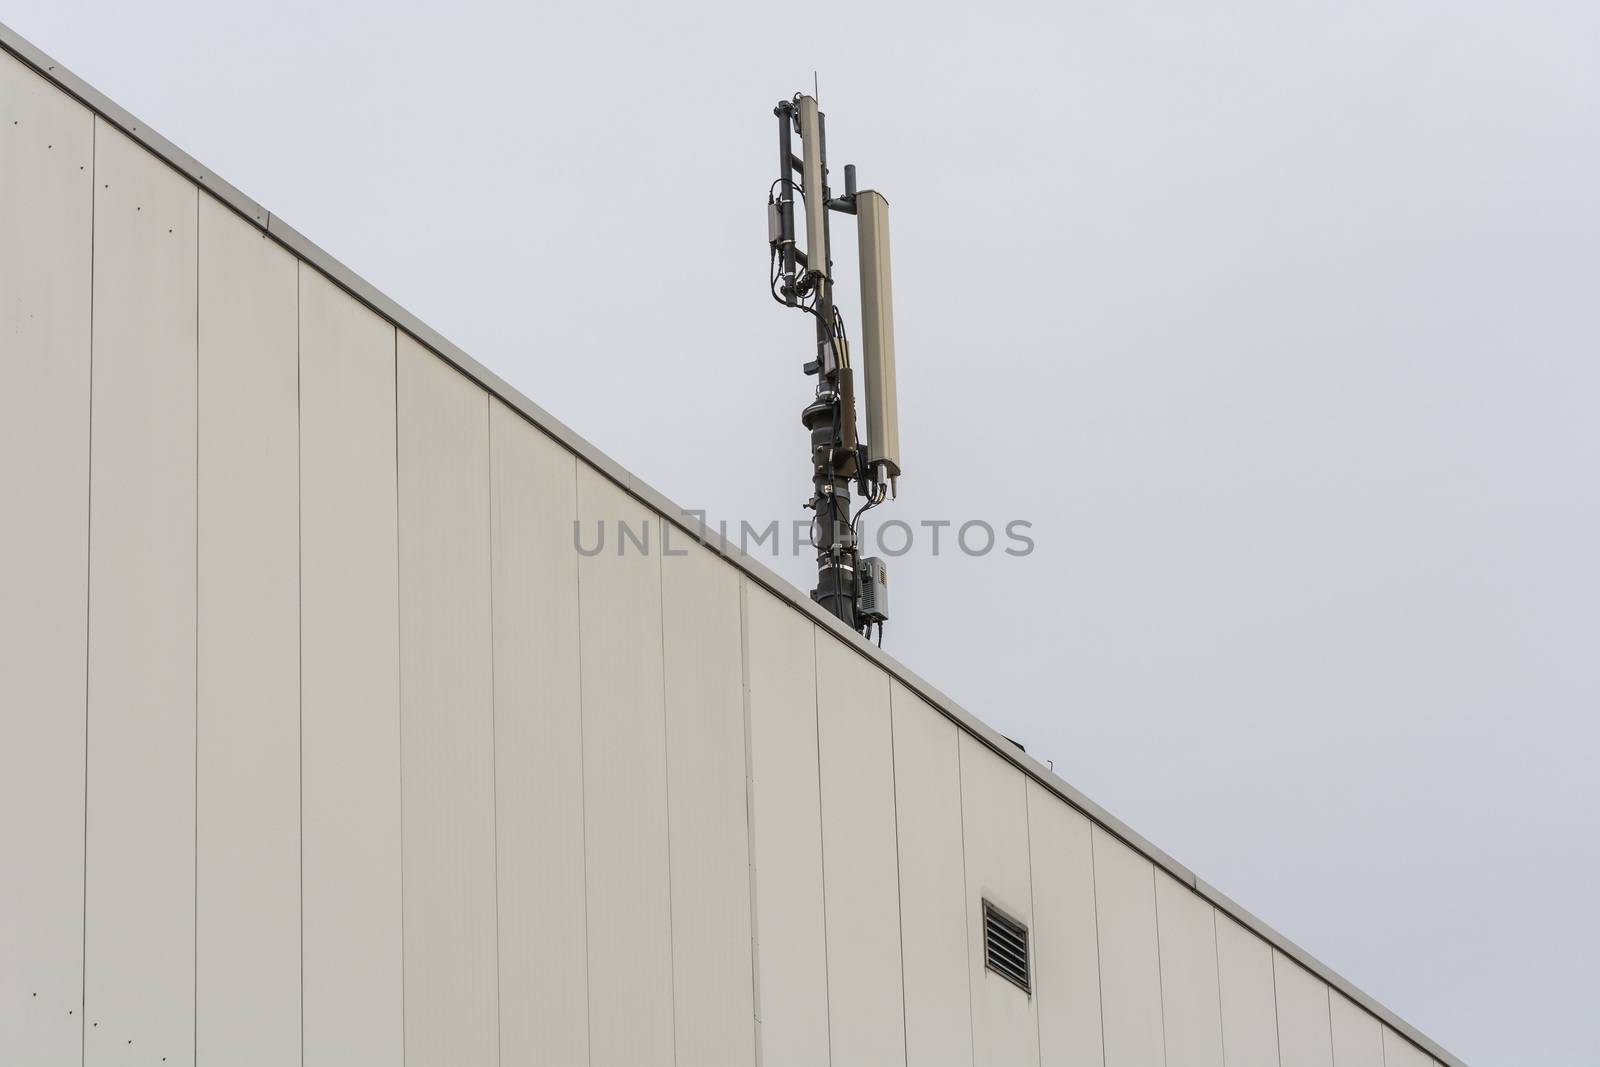  Antenna, telecommunications tower on a roof          by JFsPic